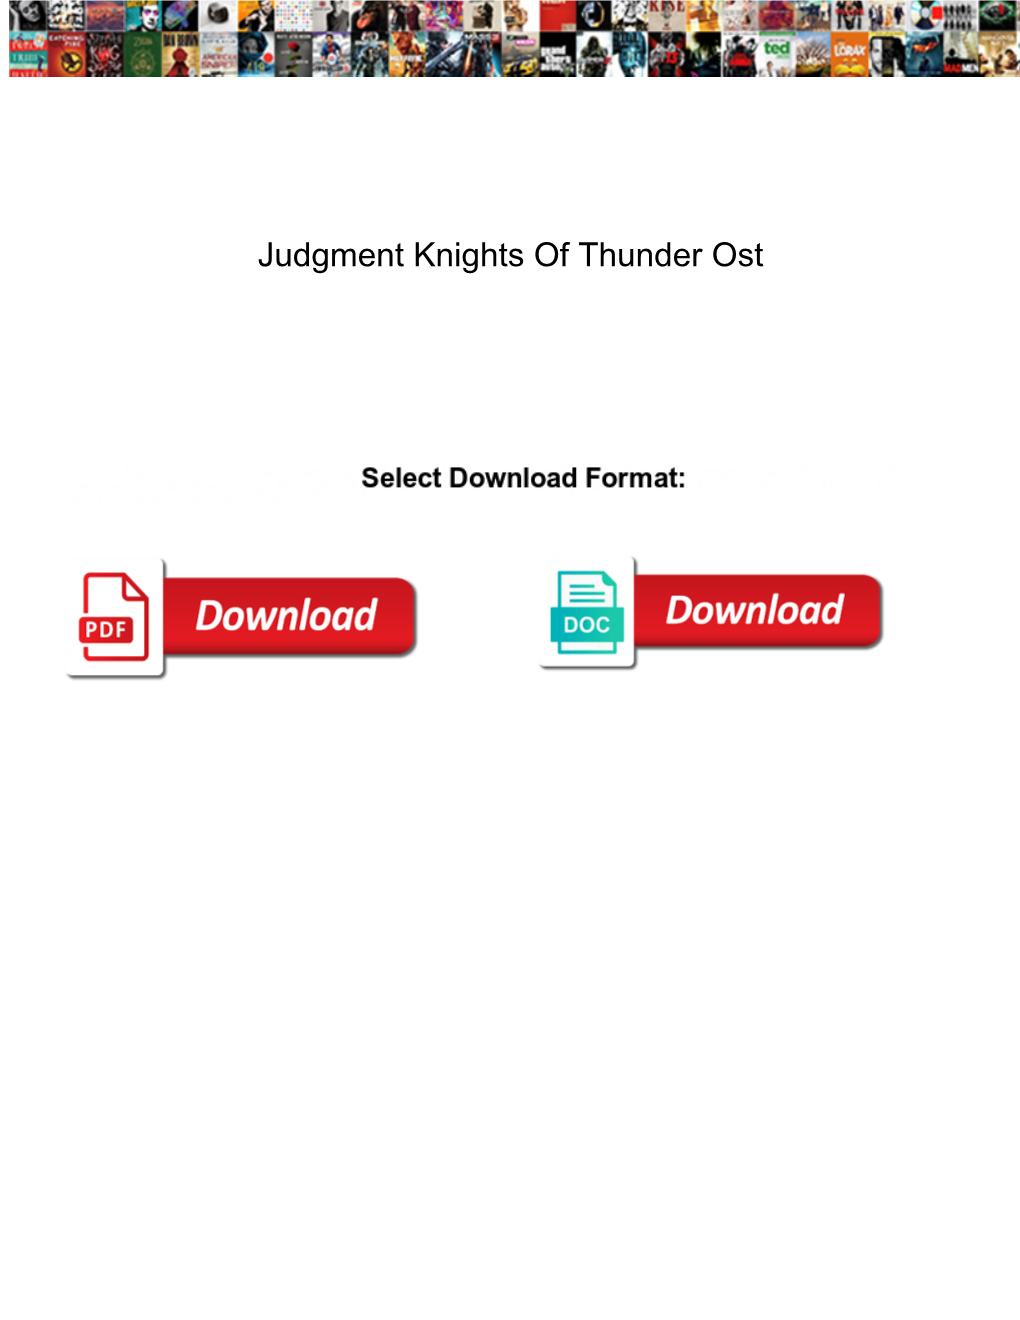 Judgment Knights of Thunder Ost